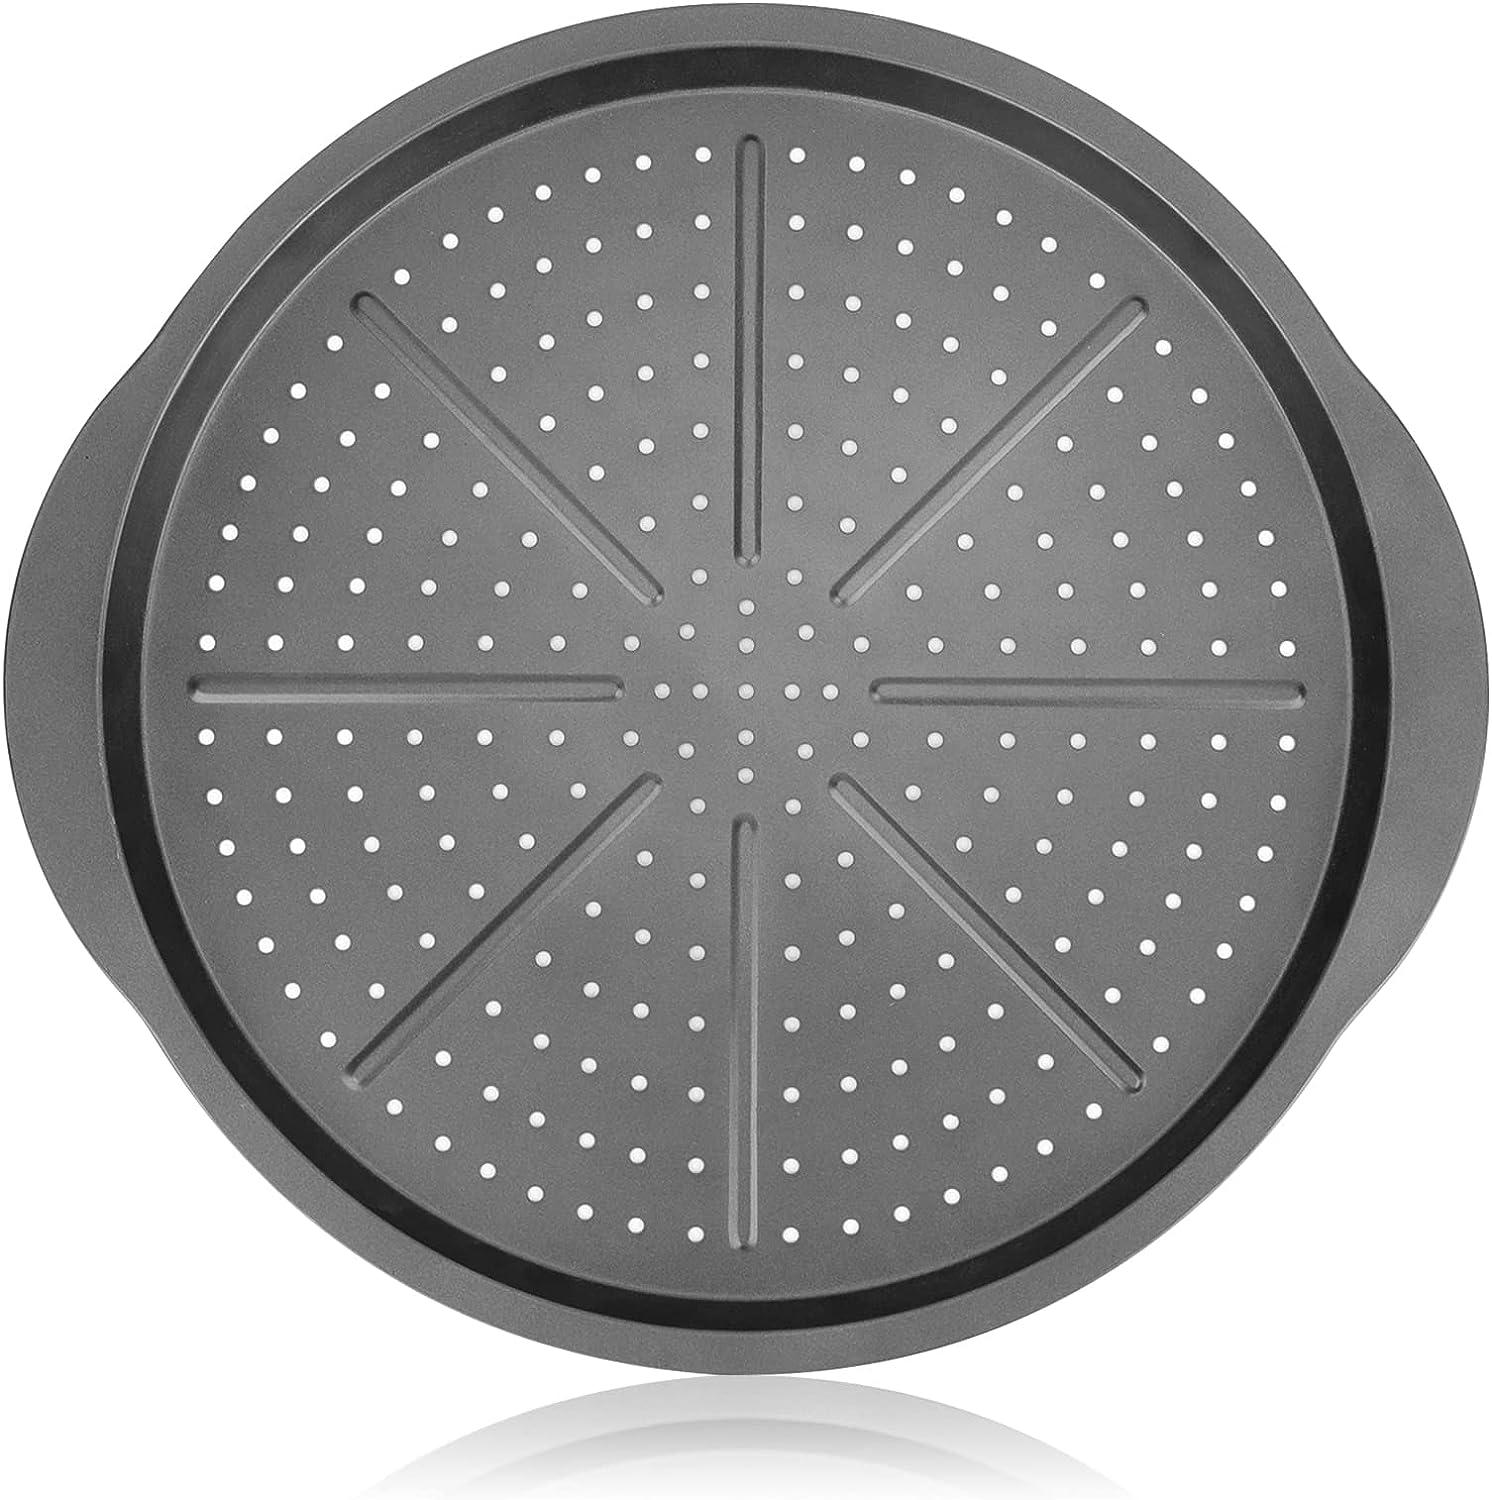 Beasea Bakeware with Holes Pizza Pan, 14 Inch Nonstick [...]